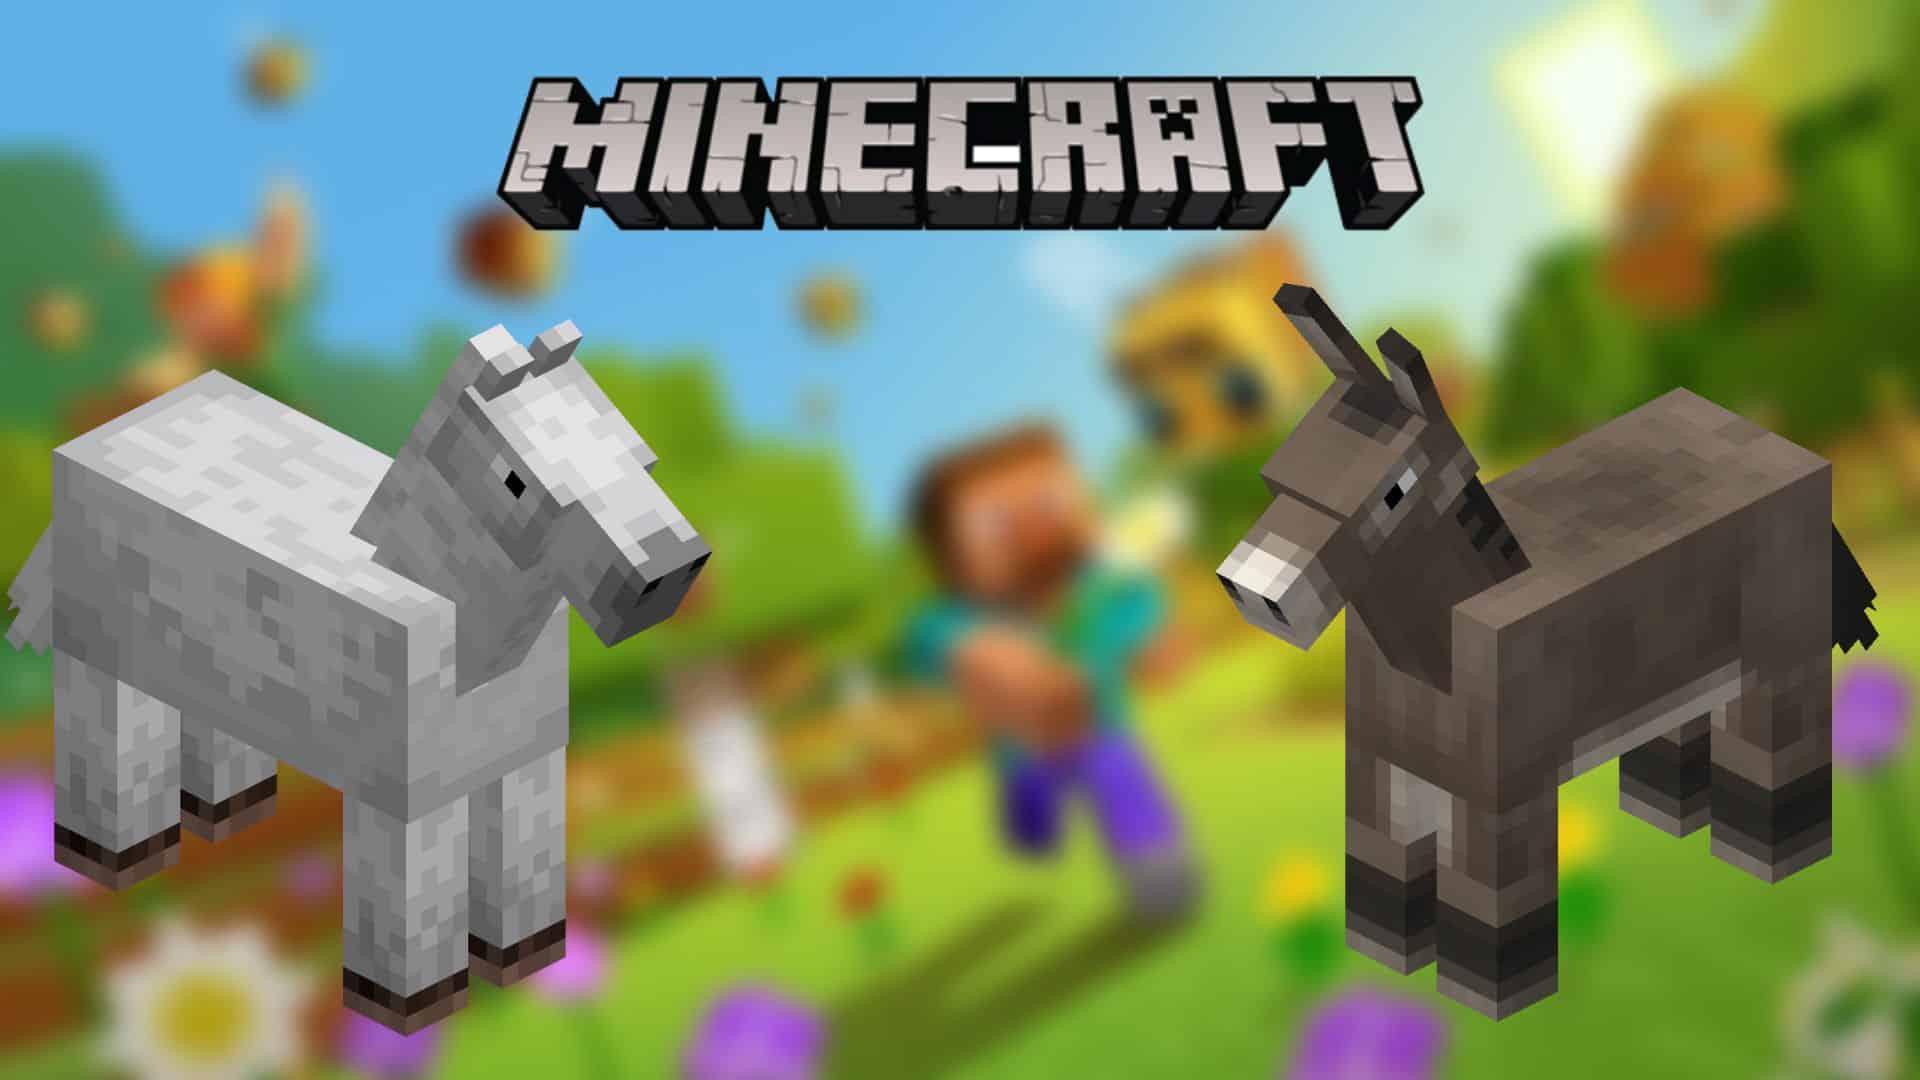 Donkey and horse in Minecraft